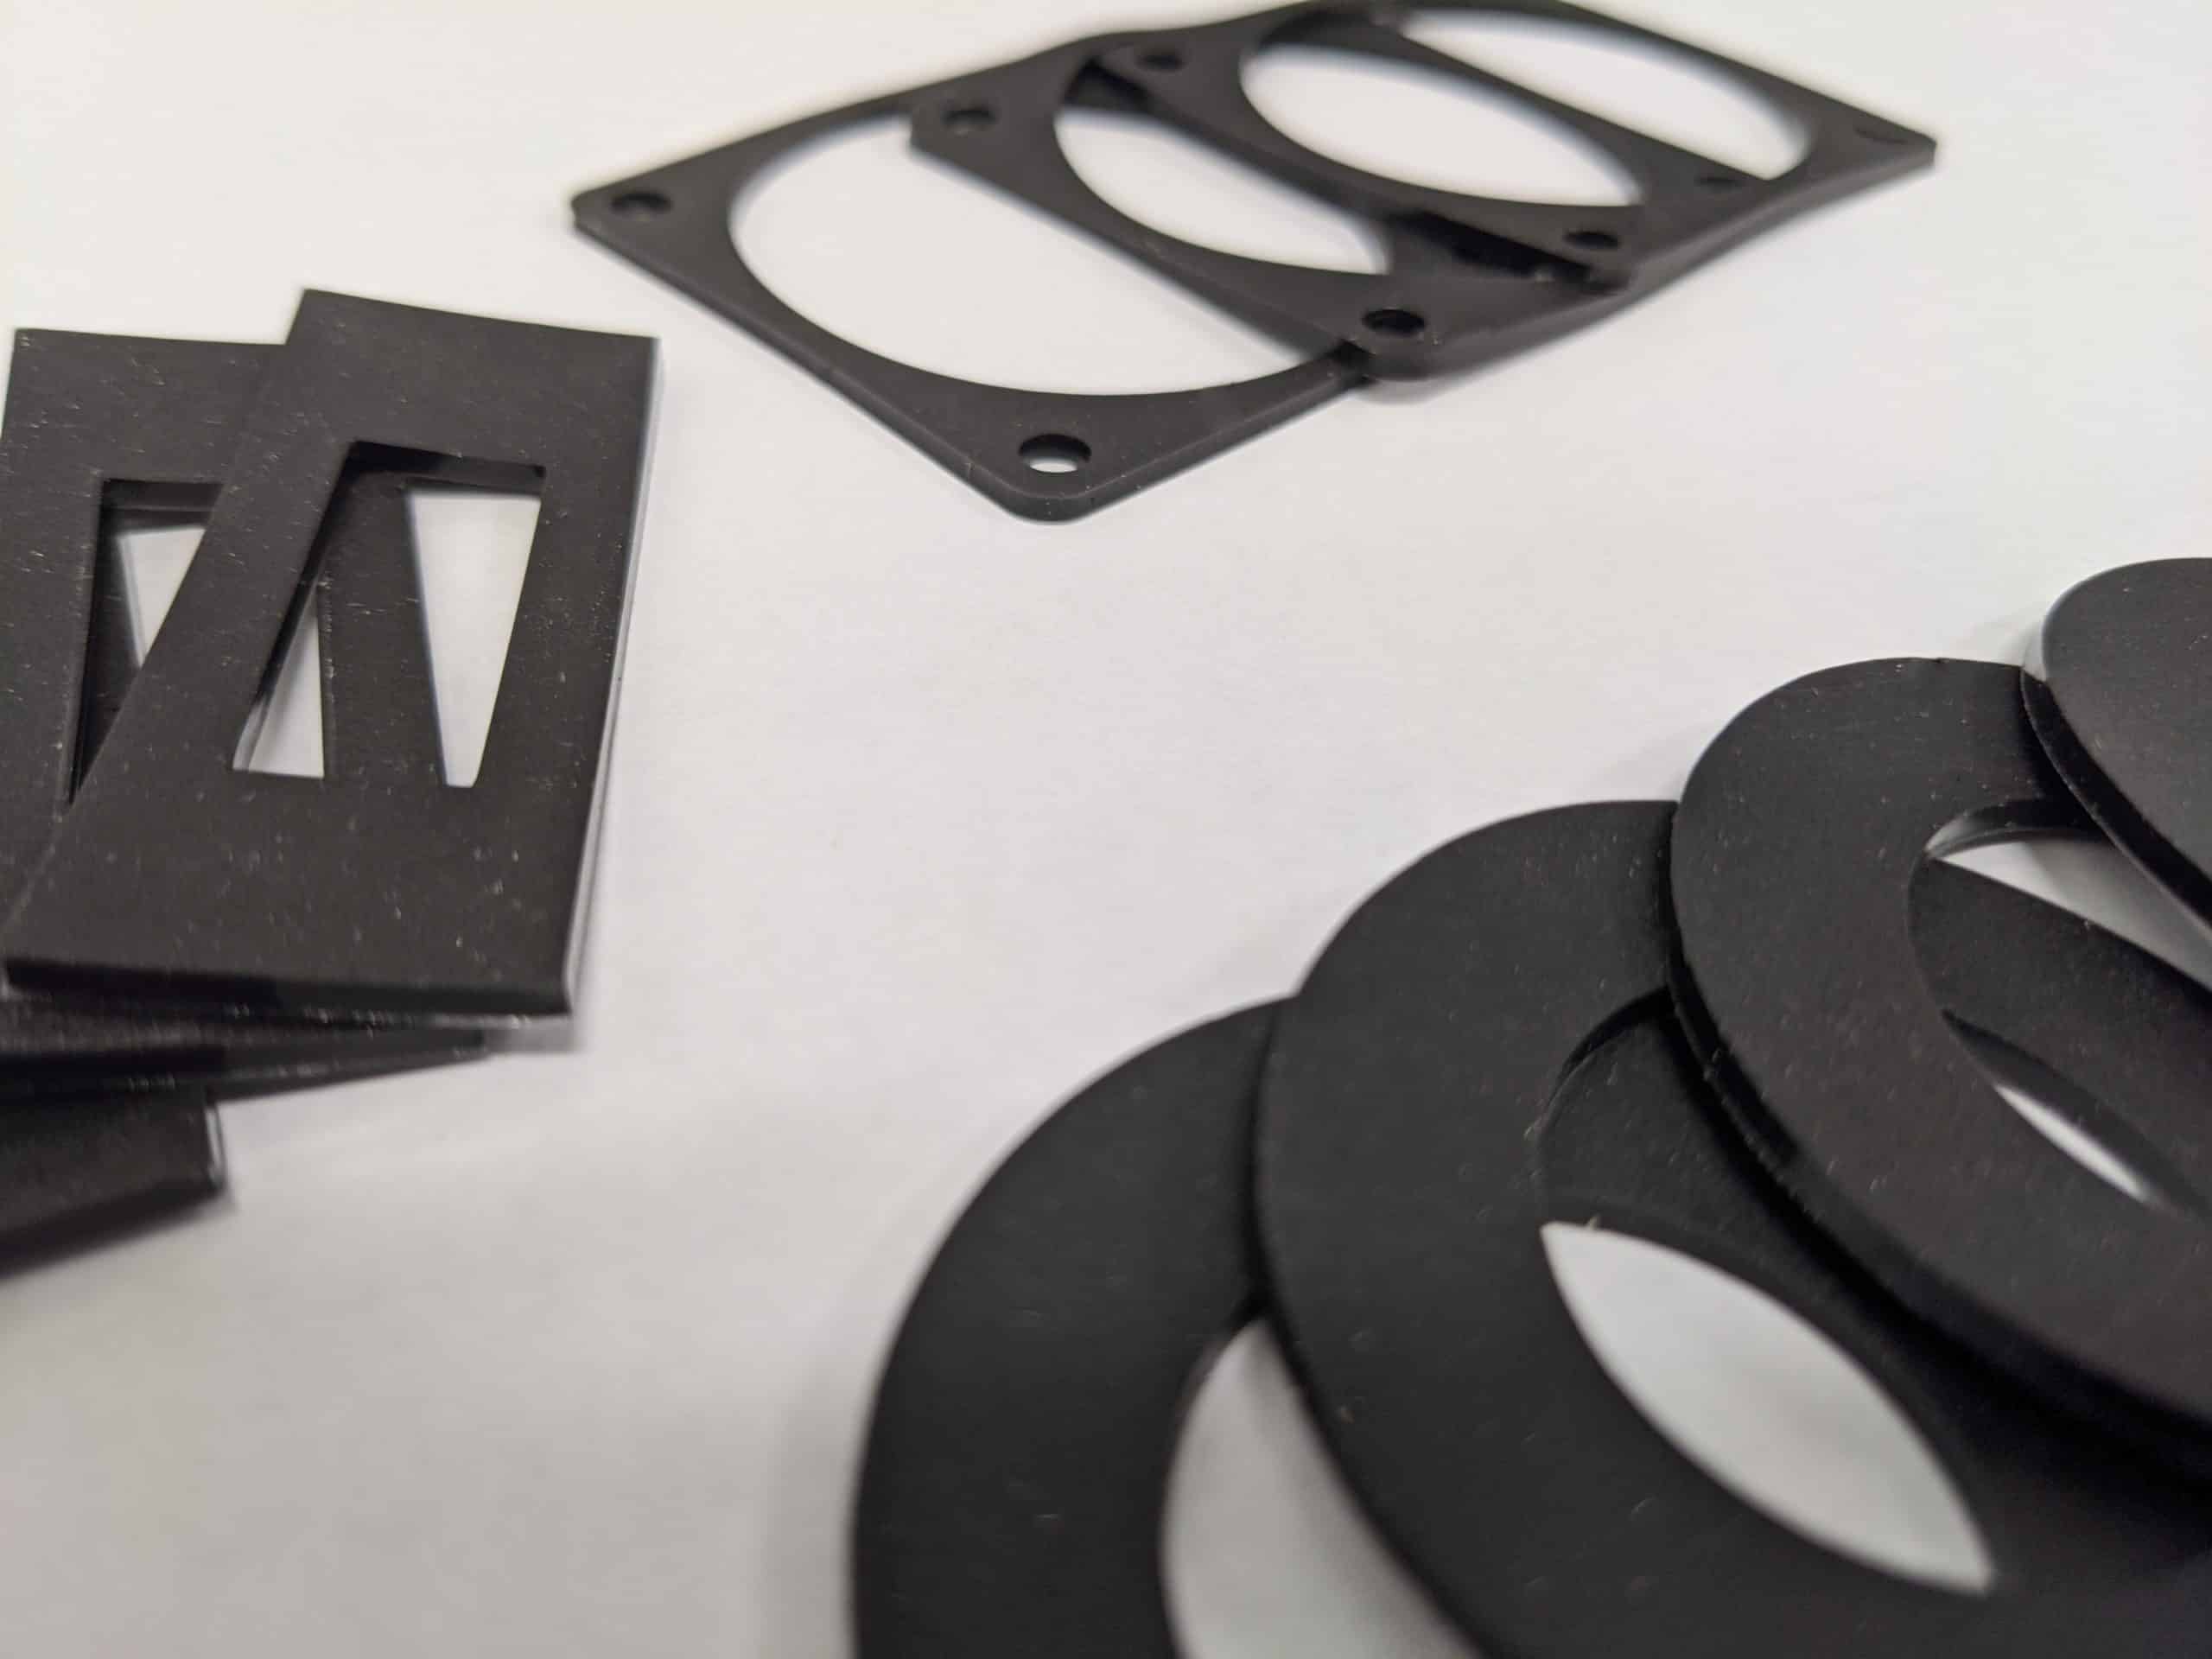 Ultra-Thin Silicone Rubber Gaskets with Adhesive Backing